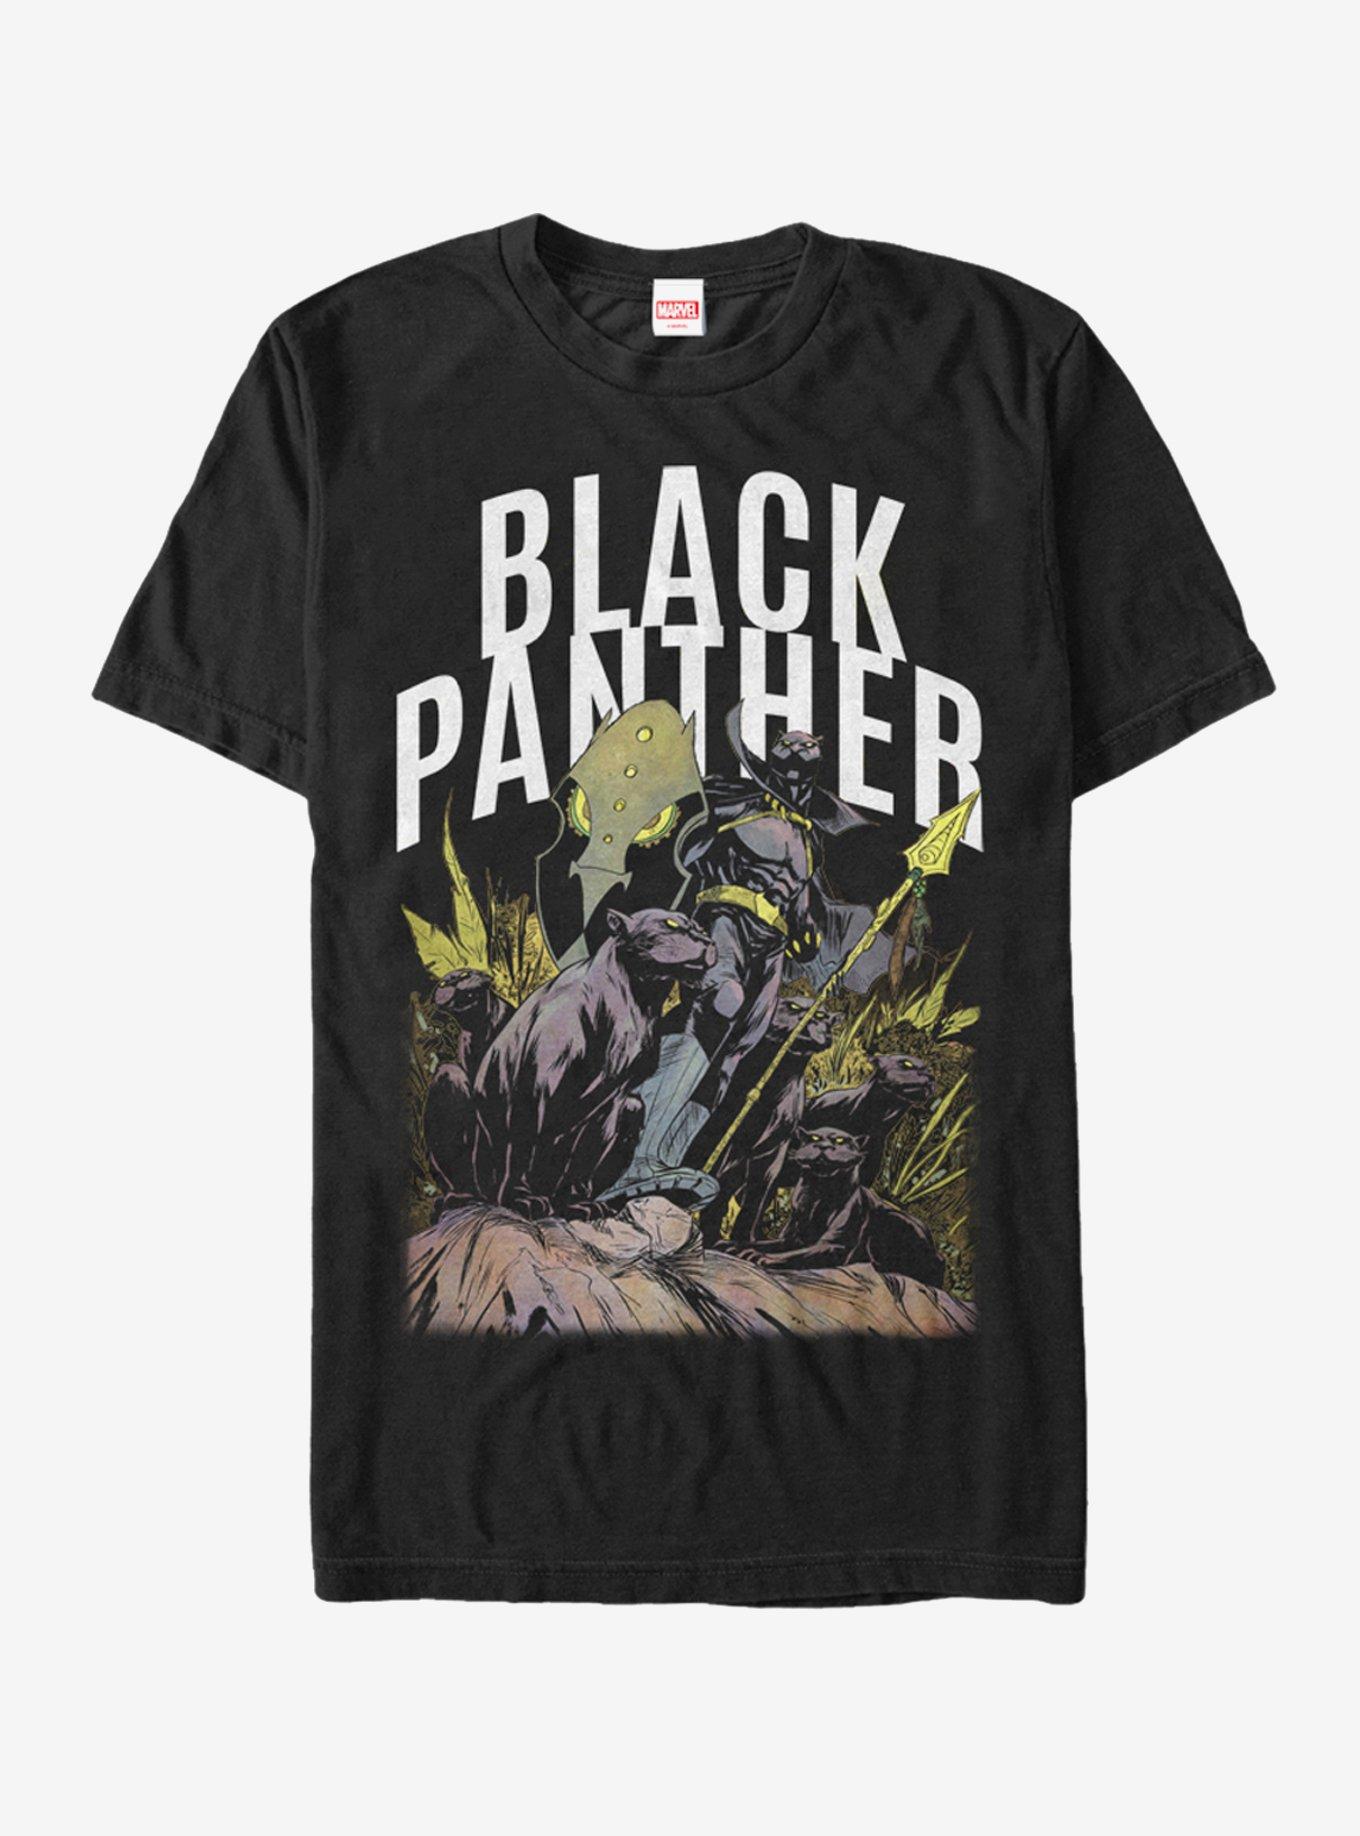 Marvel Black Panther Army T-Shirt